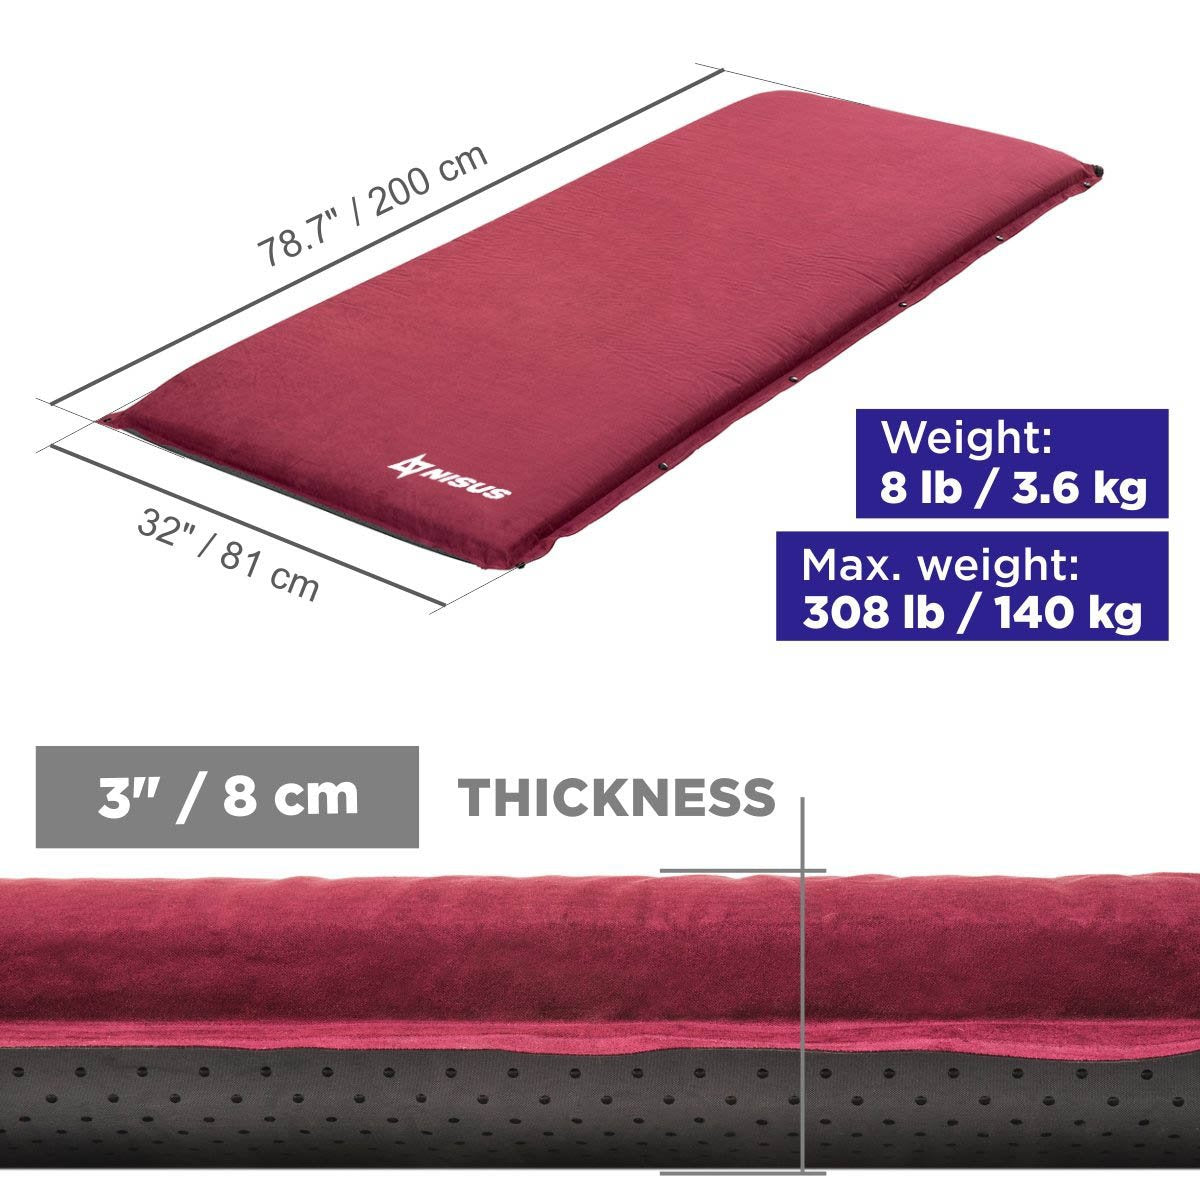 3-inch Self Inflating Camping Sleeping Pad weighs 8 lbs, carries up to 308 lbs. It is 78.7 inches long and 32  inches wide